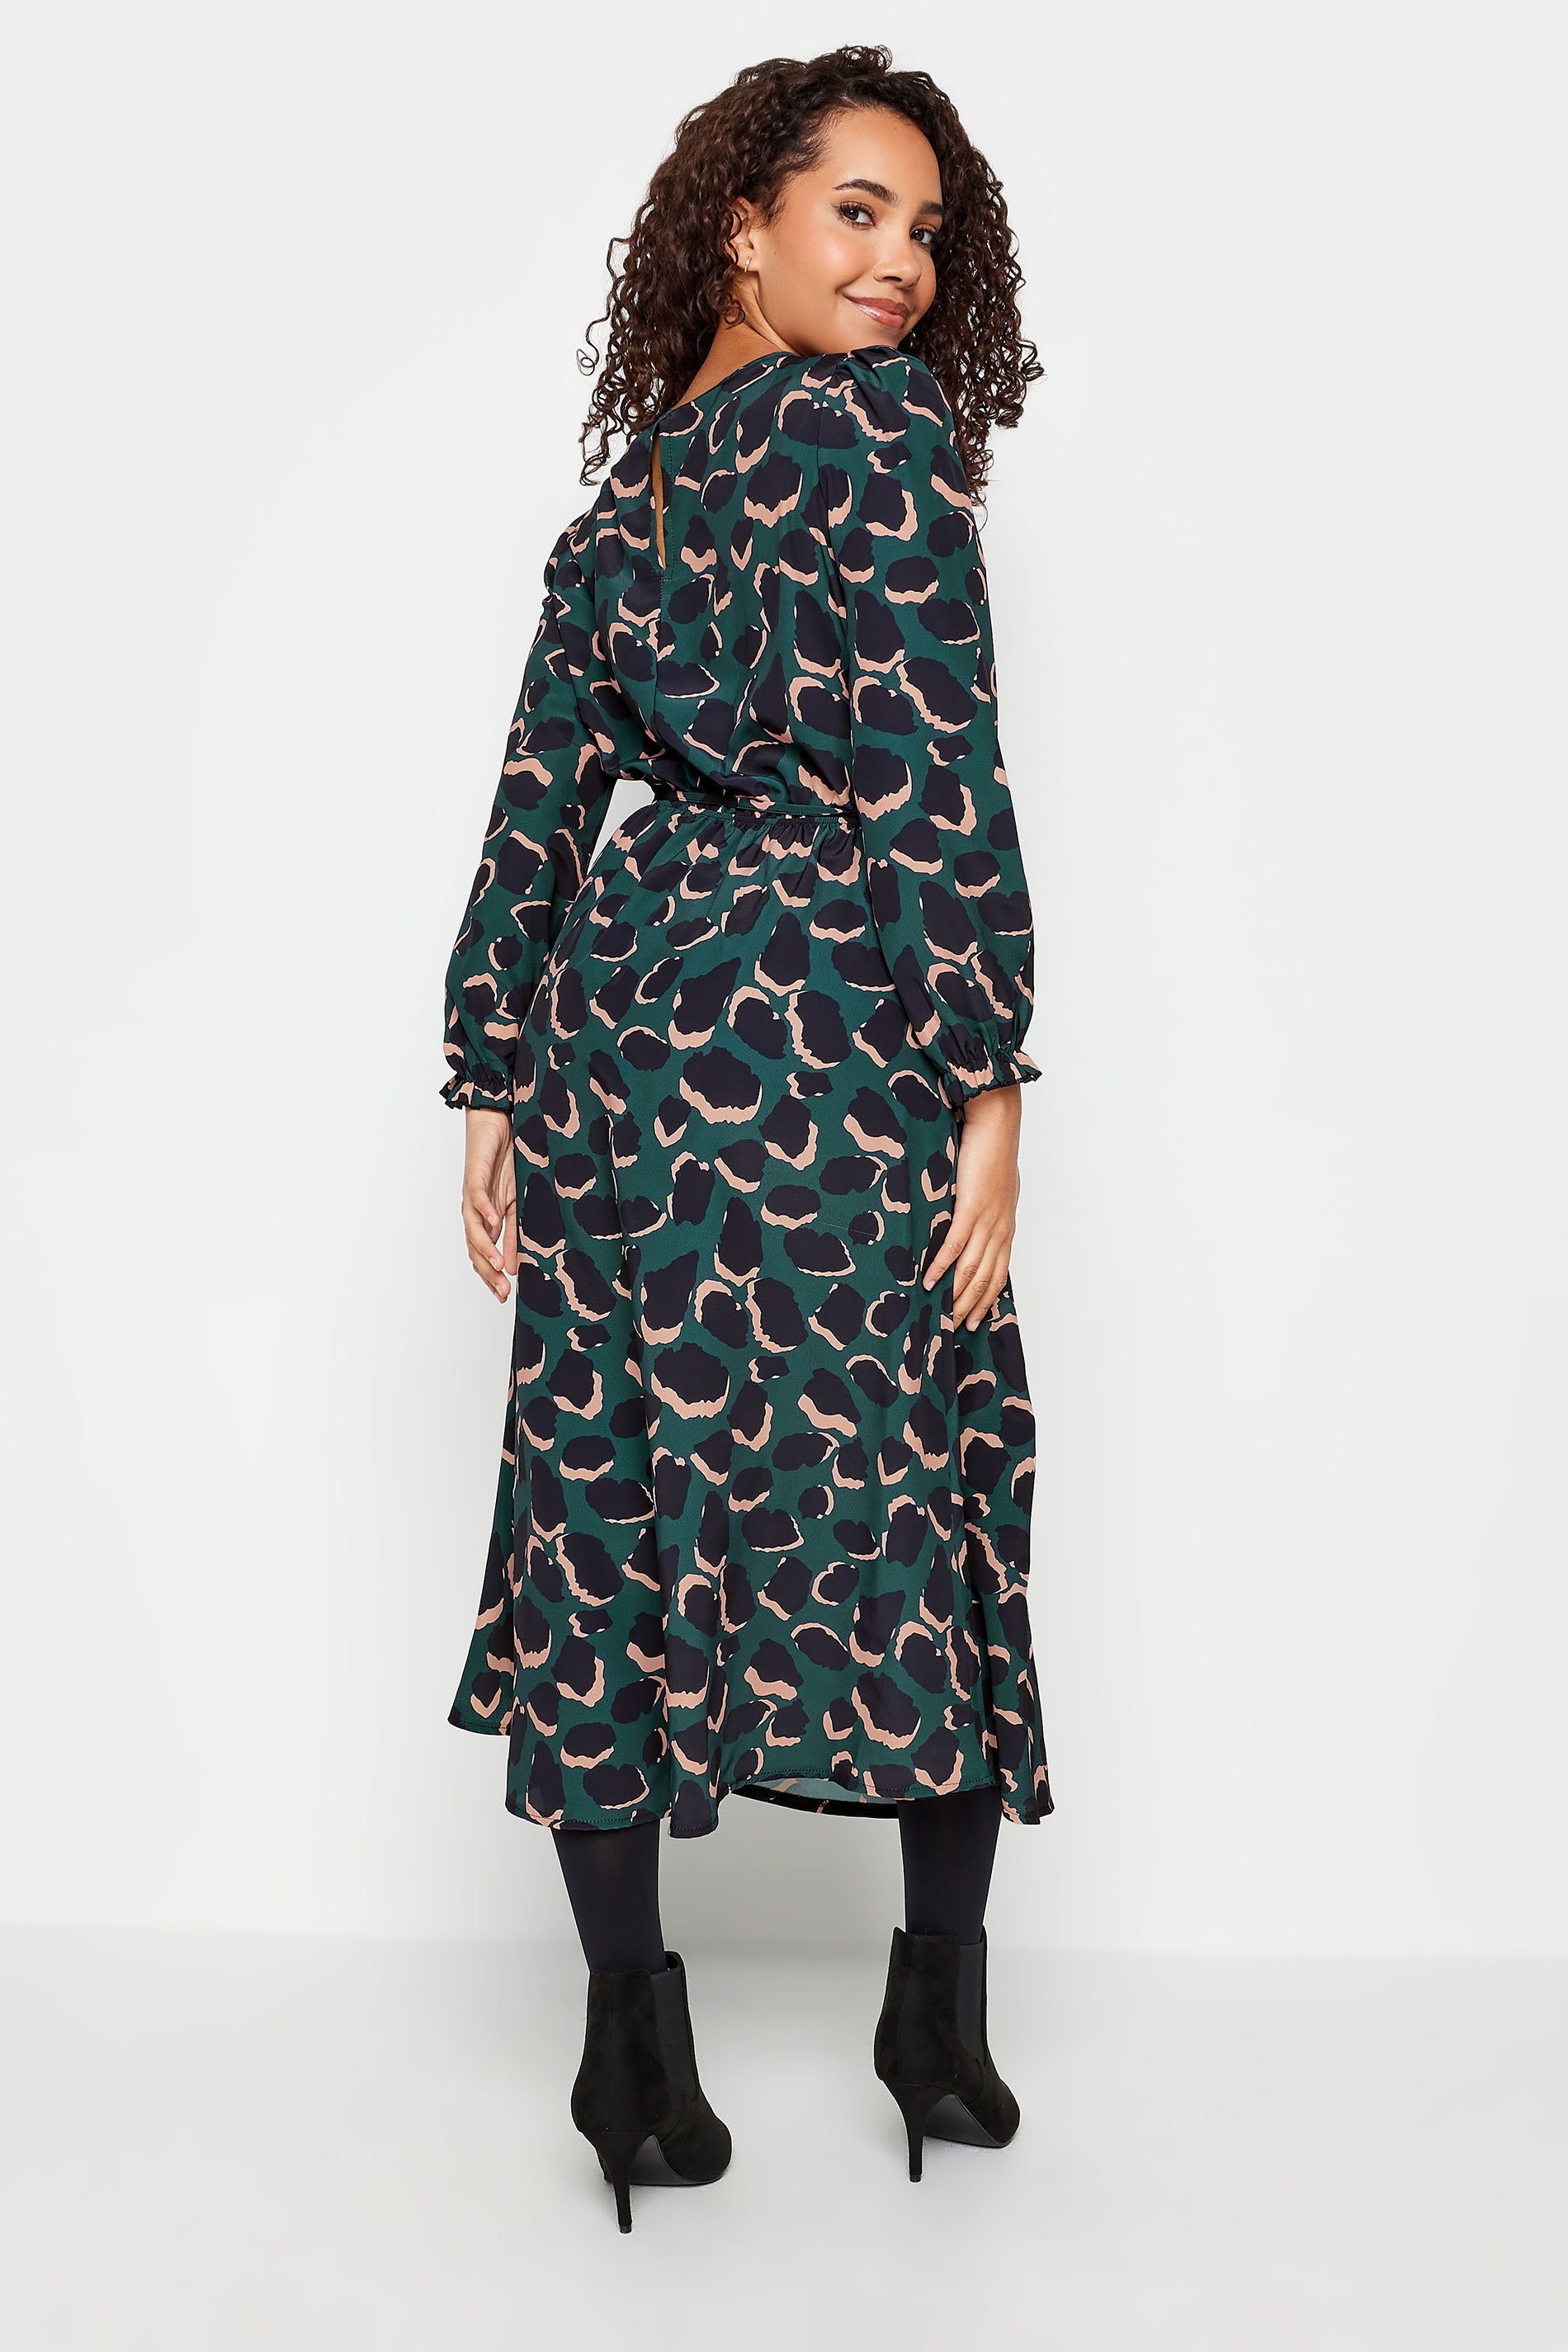 M&Co Green Abstract Print Smock Dress | M&Co 3